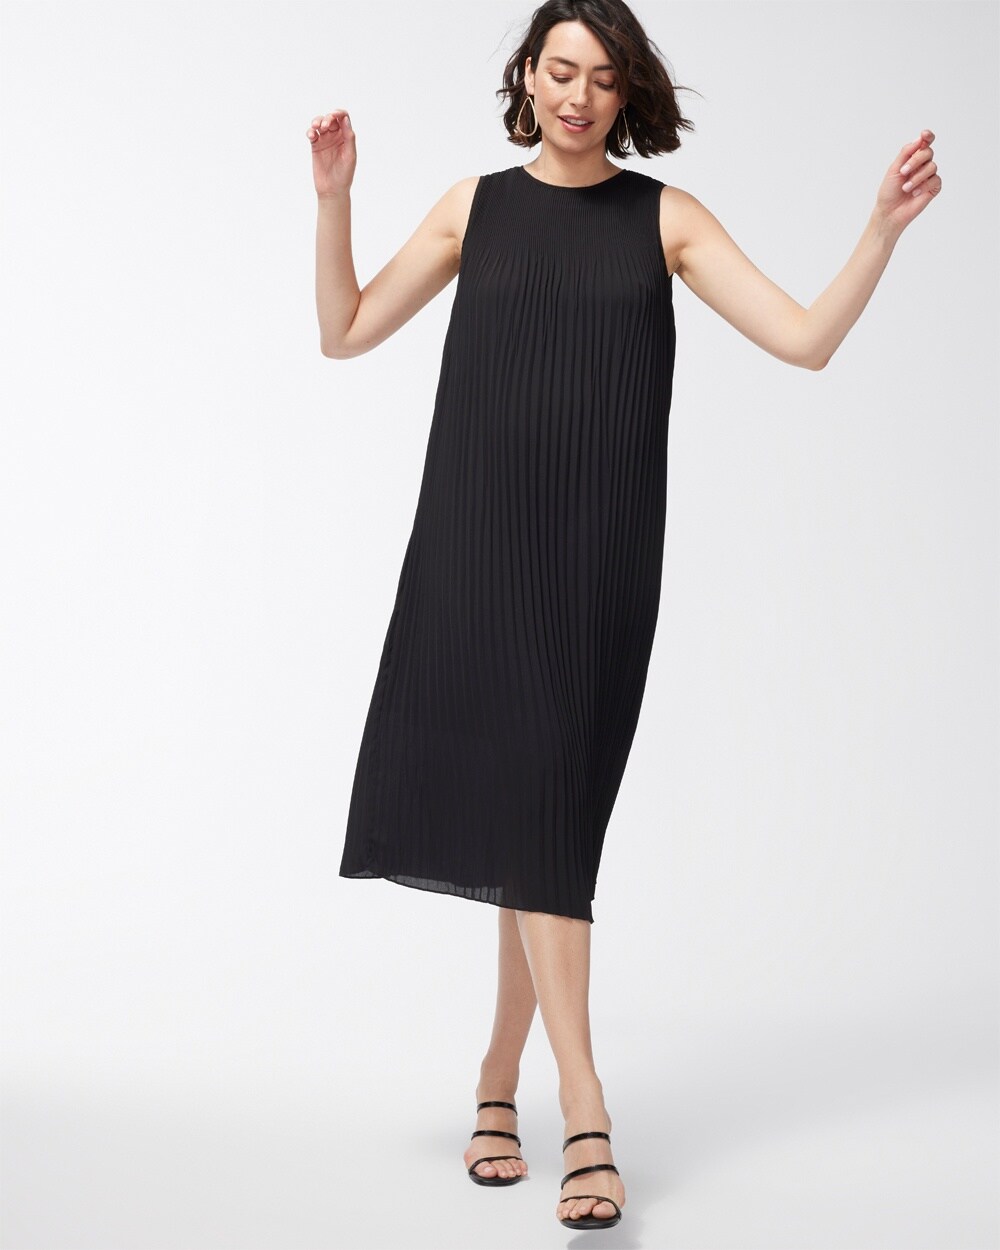 Black Label Georgette Pleated Dress video preview image, click to start video